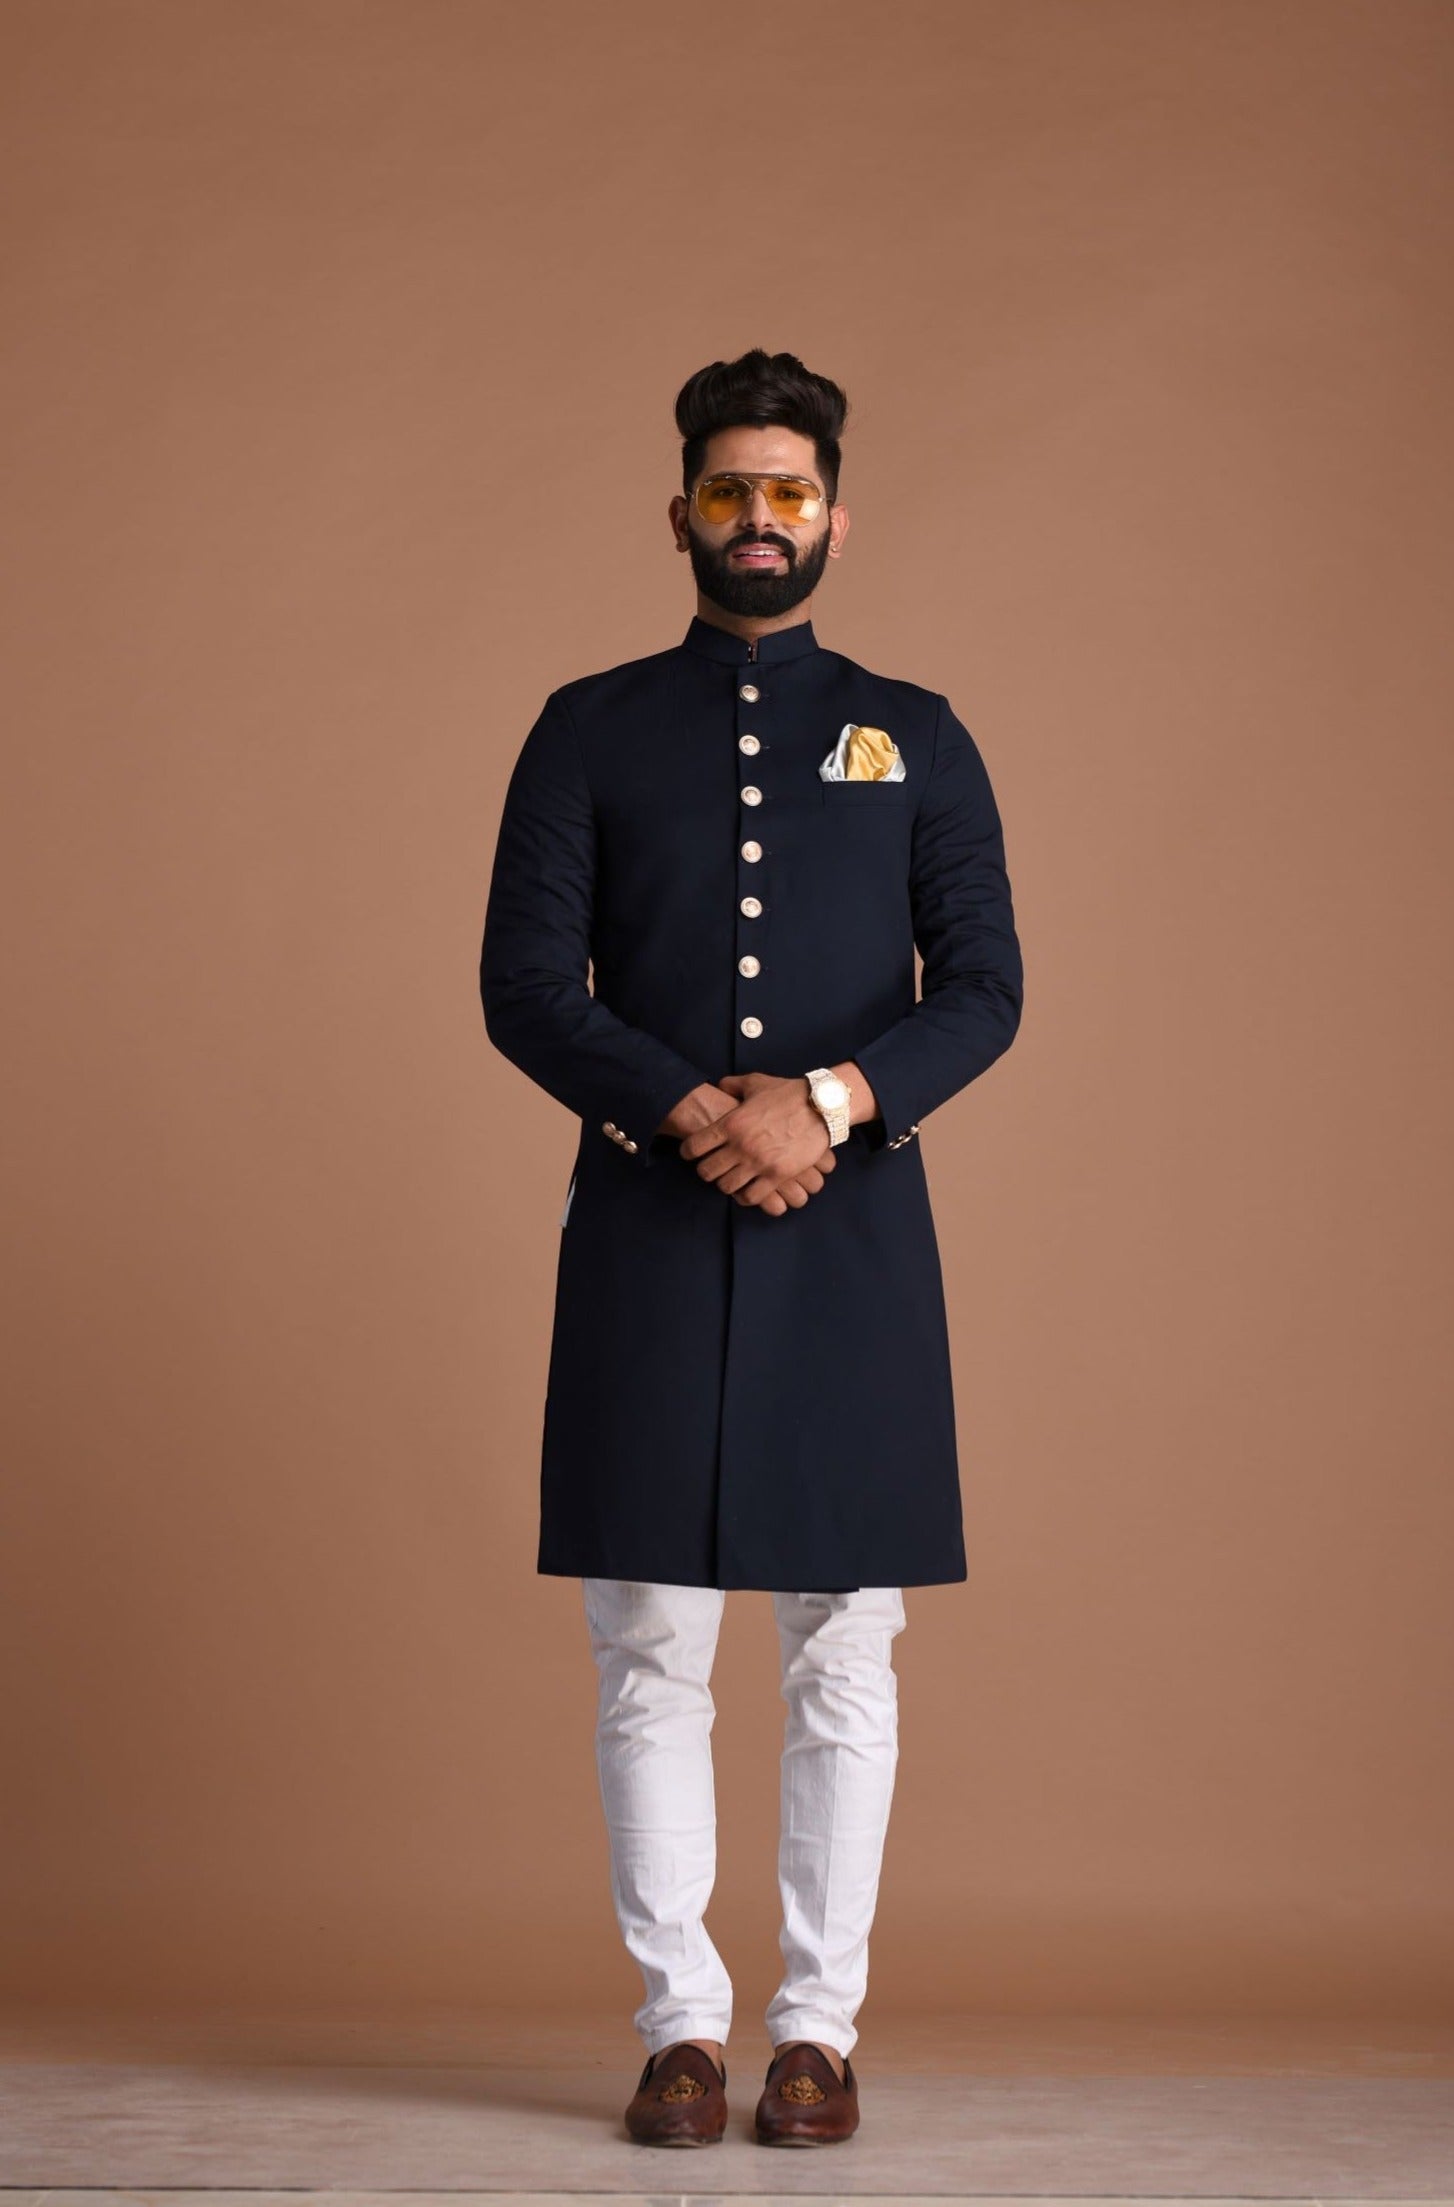 Traditional Hand-crafted Navy Blue Sherwani/ Achkan for Men | Terry Rayon|Formal Kurta Style wear | Perfect for Family Weddings & Grooms